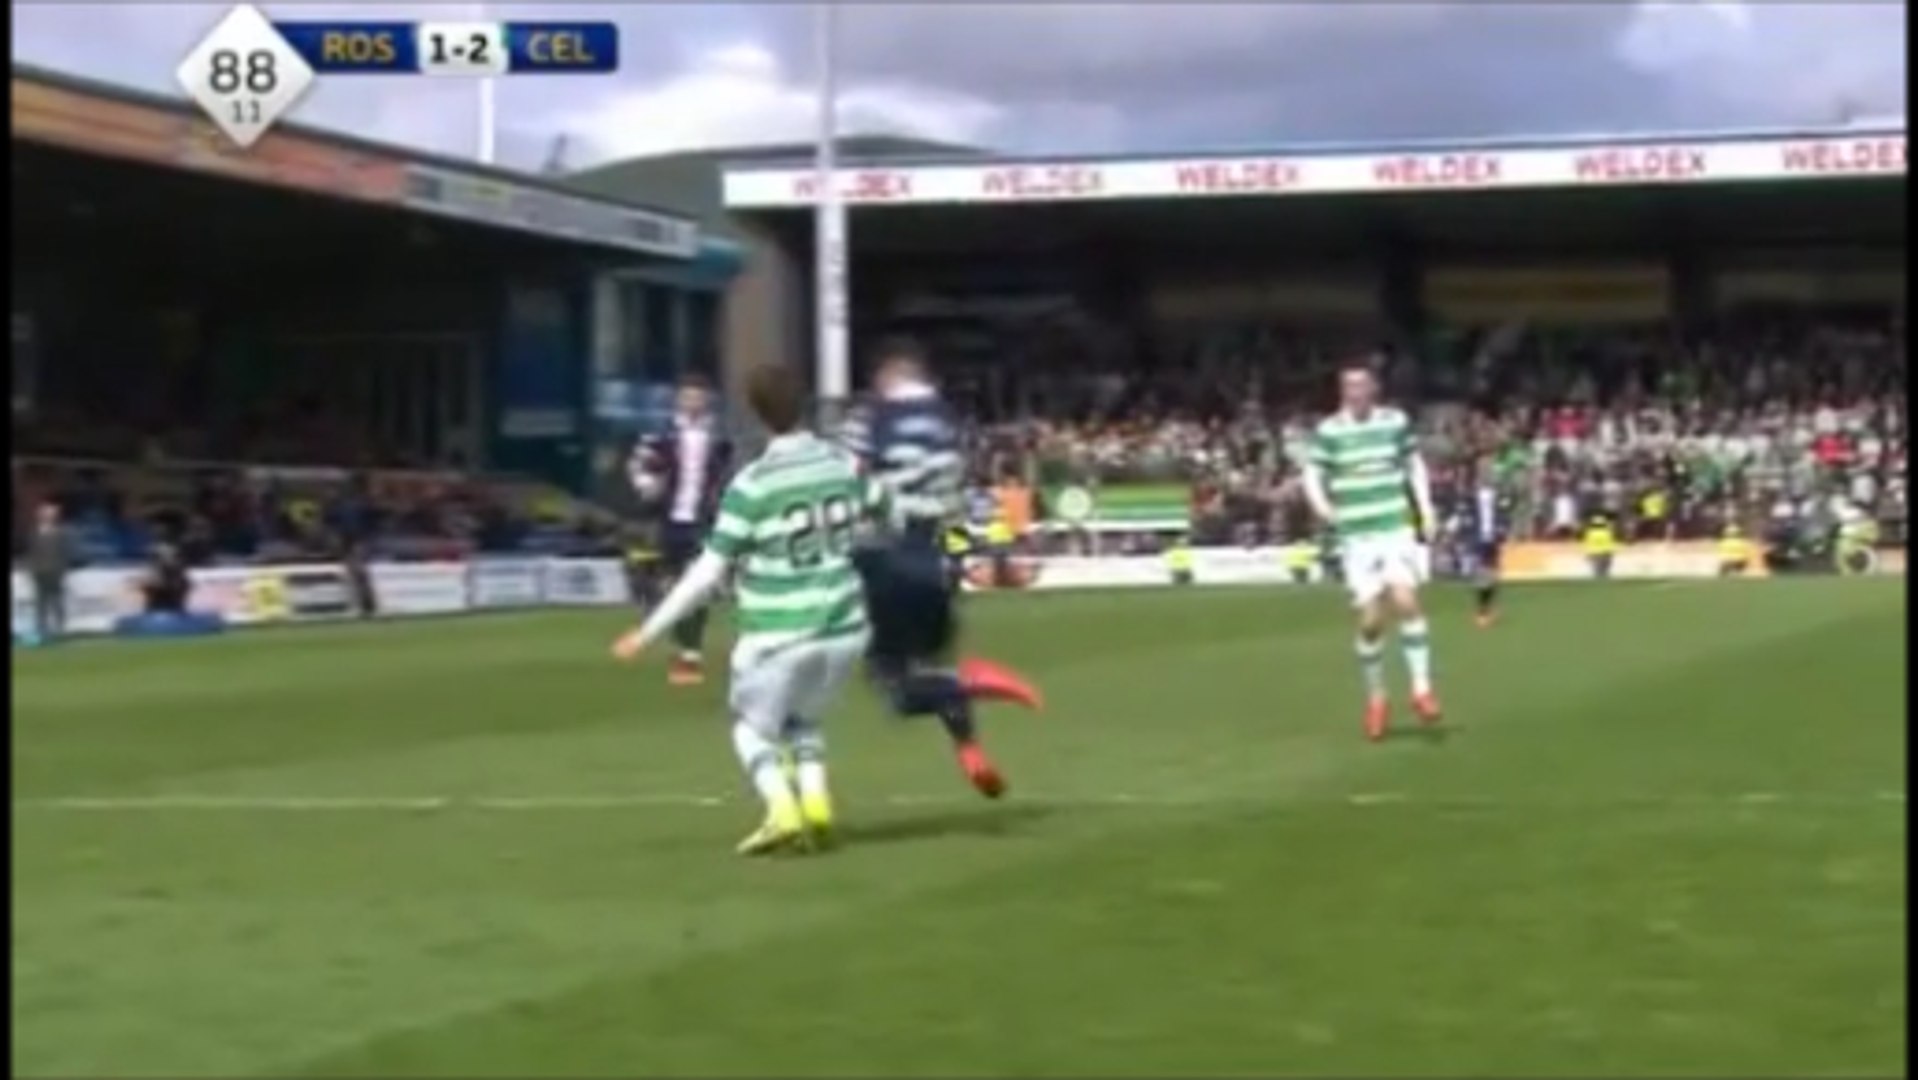 Ross County Awarded A Ridiculous Penalty After Alex Schalk Clear Dive vs Celtic!